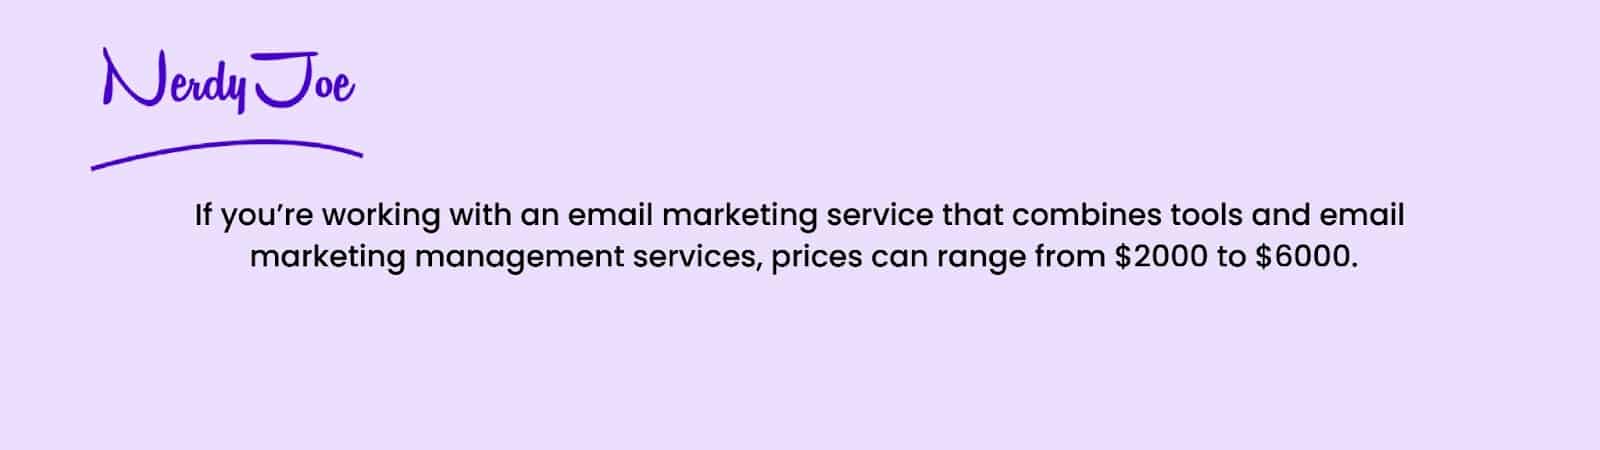 email marketing tools and email service provider pricing